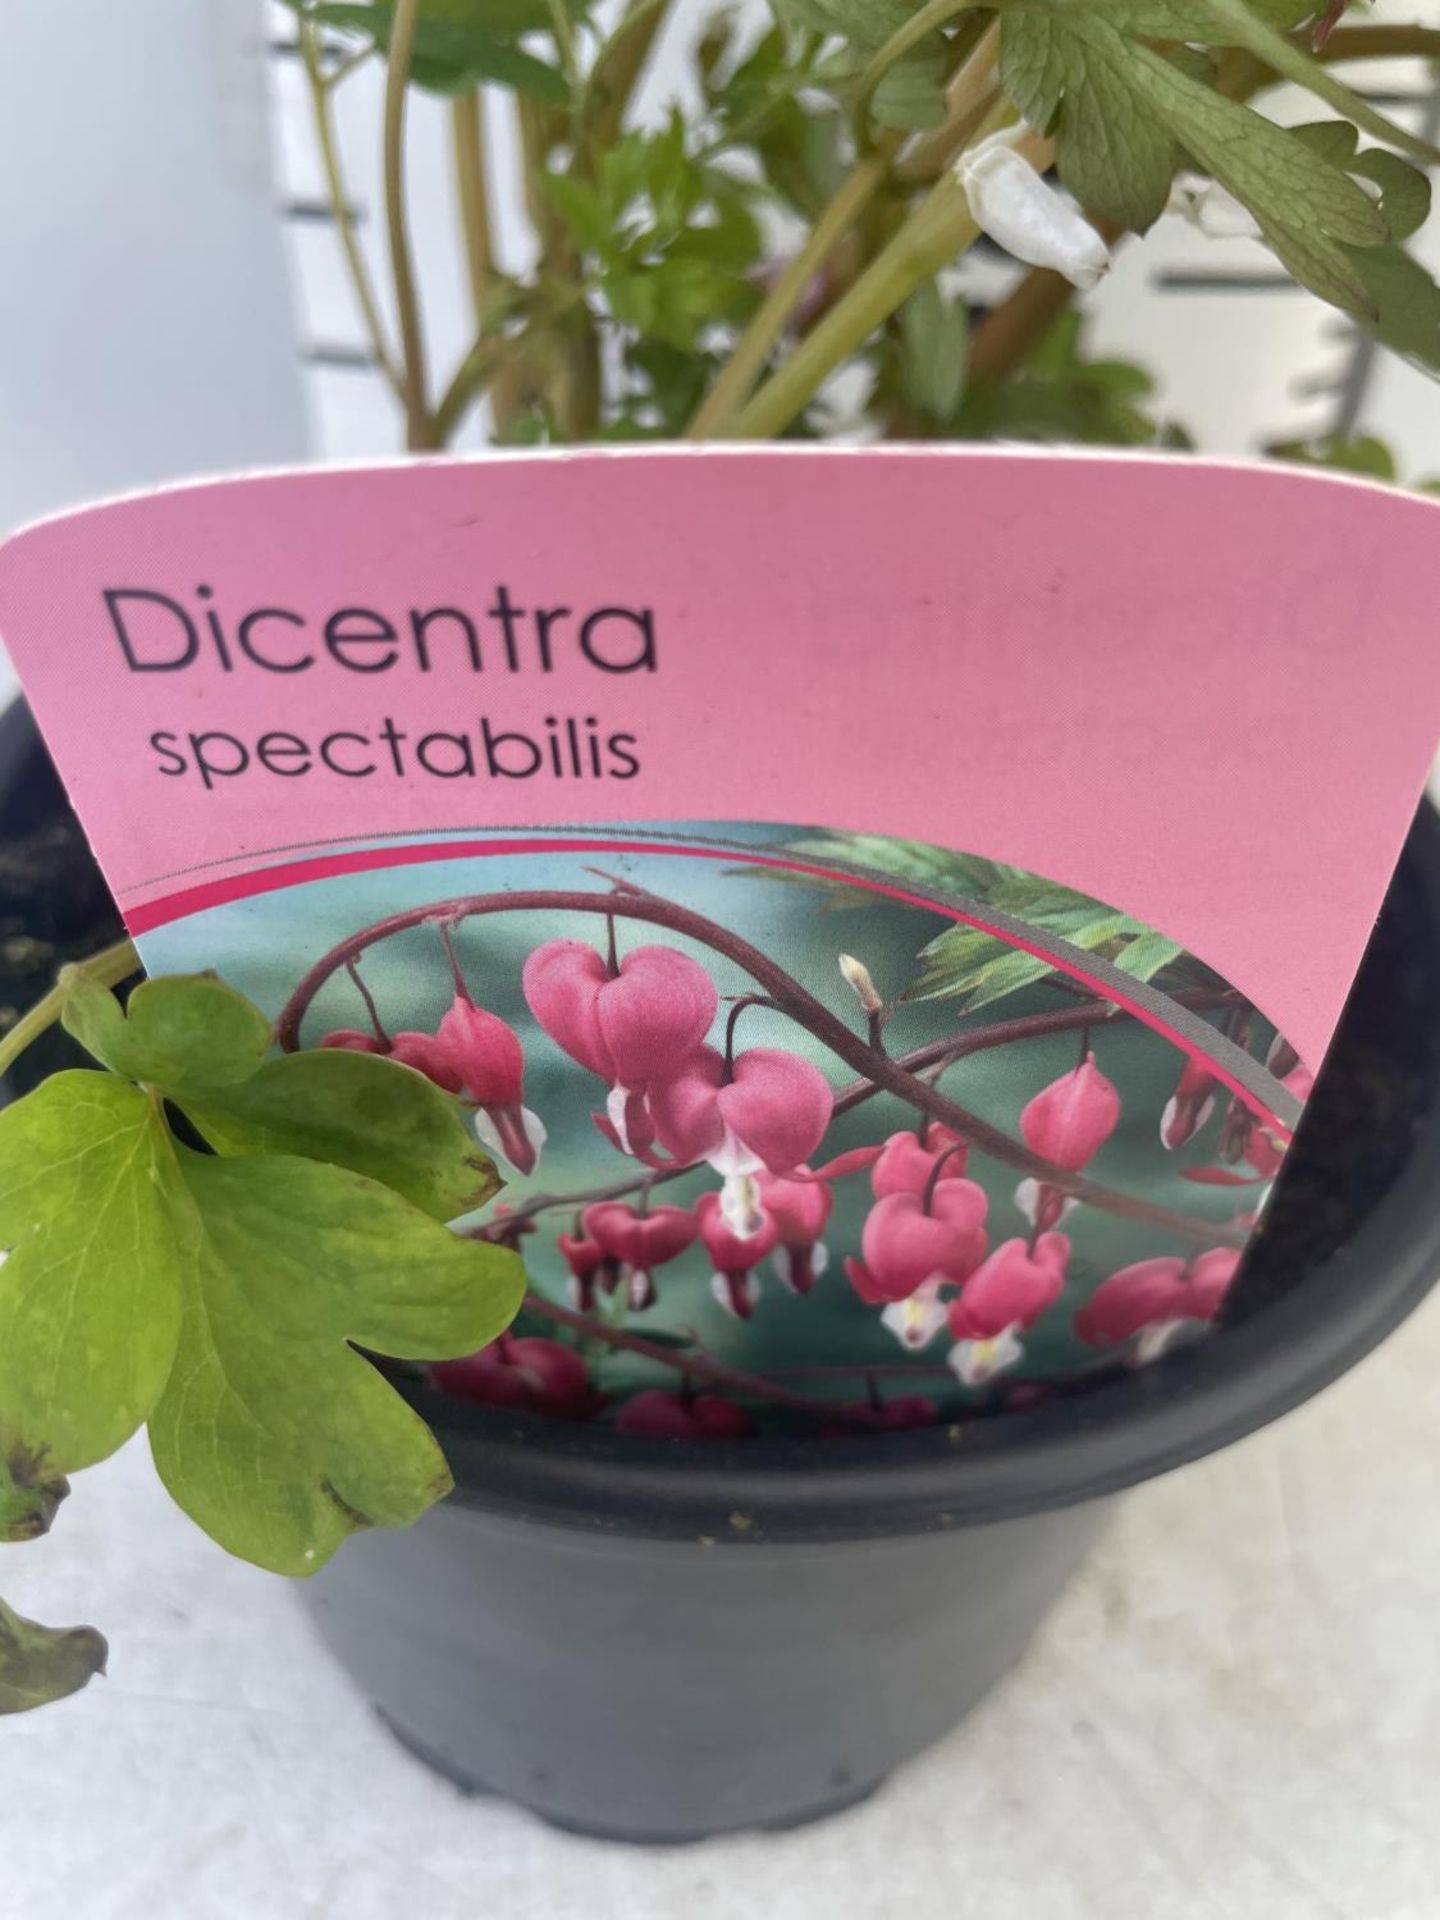 SIX DICENTRA SPECTABILIS BLEEDING HEART 50CM TALL TO BE SOLD FOR THE SIX PLUS VAT - Image 5 of 5